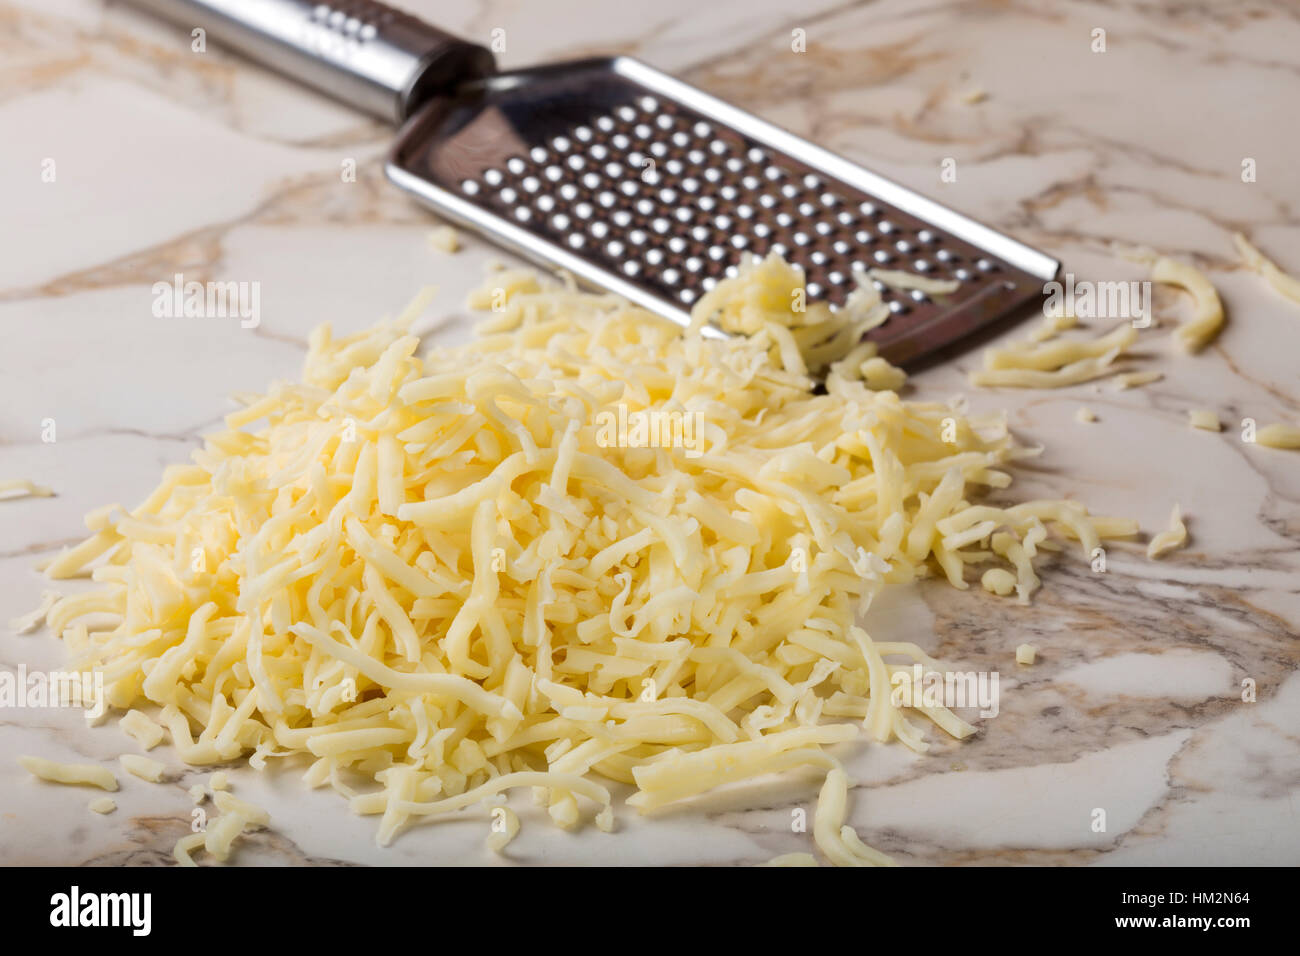 Grated mix cheese on table and one stainless steal grater in background Stock Photo